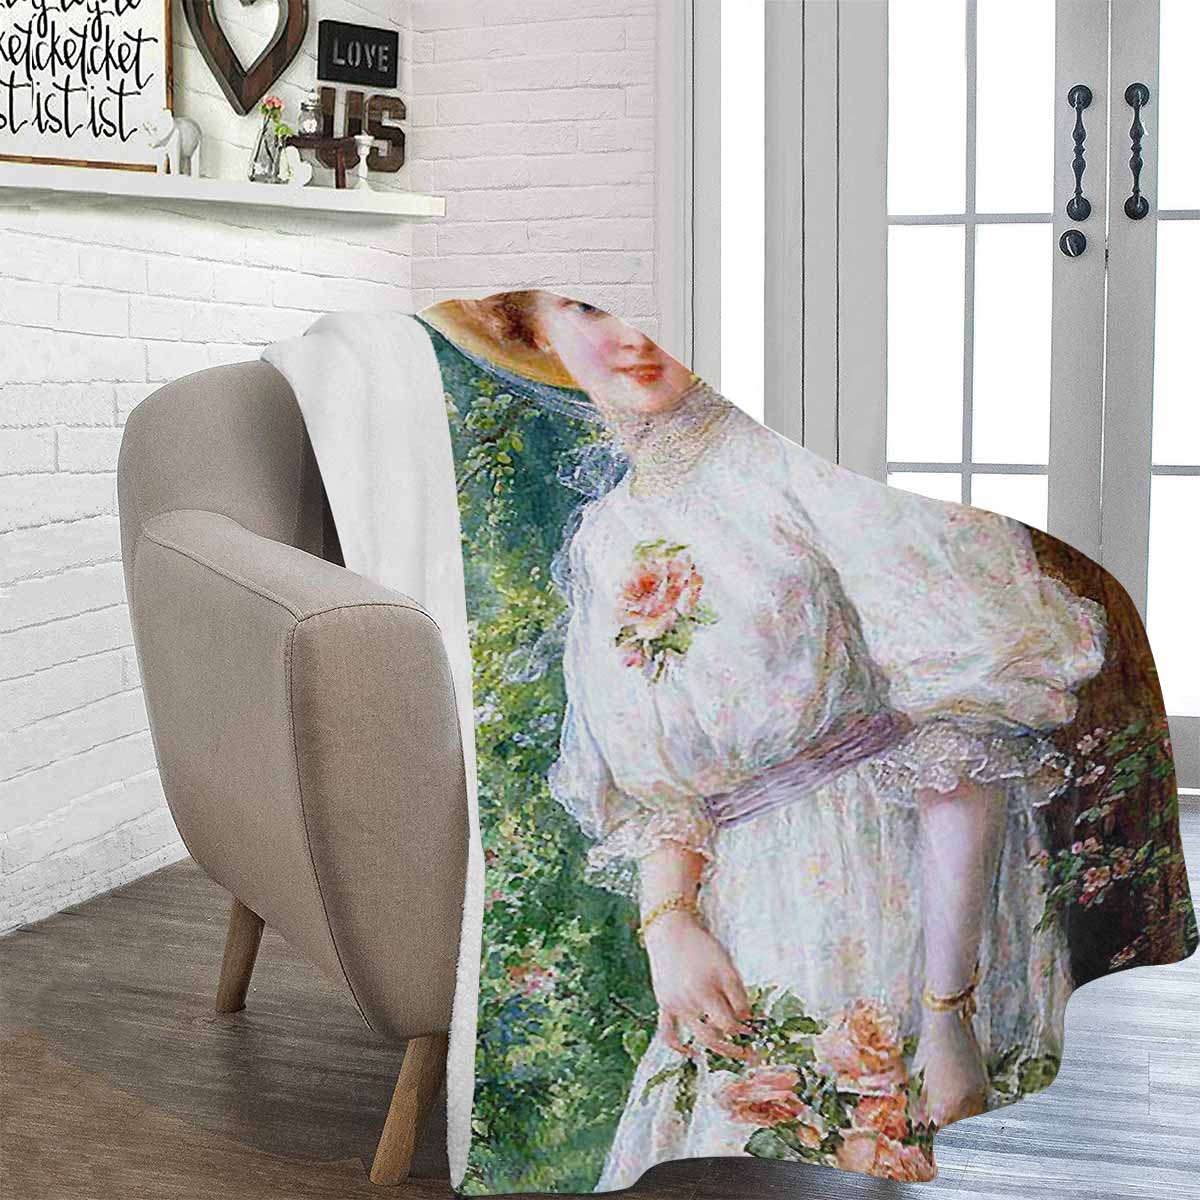 Victorian Lady Design BLANKET, LARGE 60 in x 80 in, Reverie